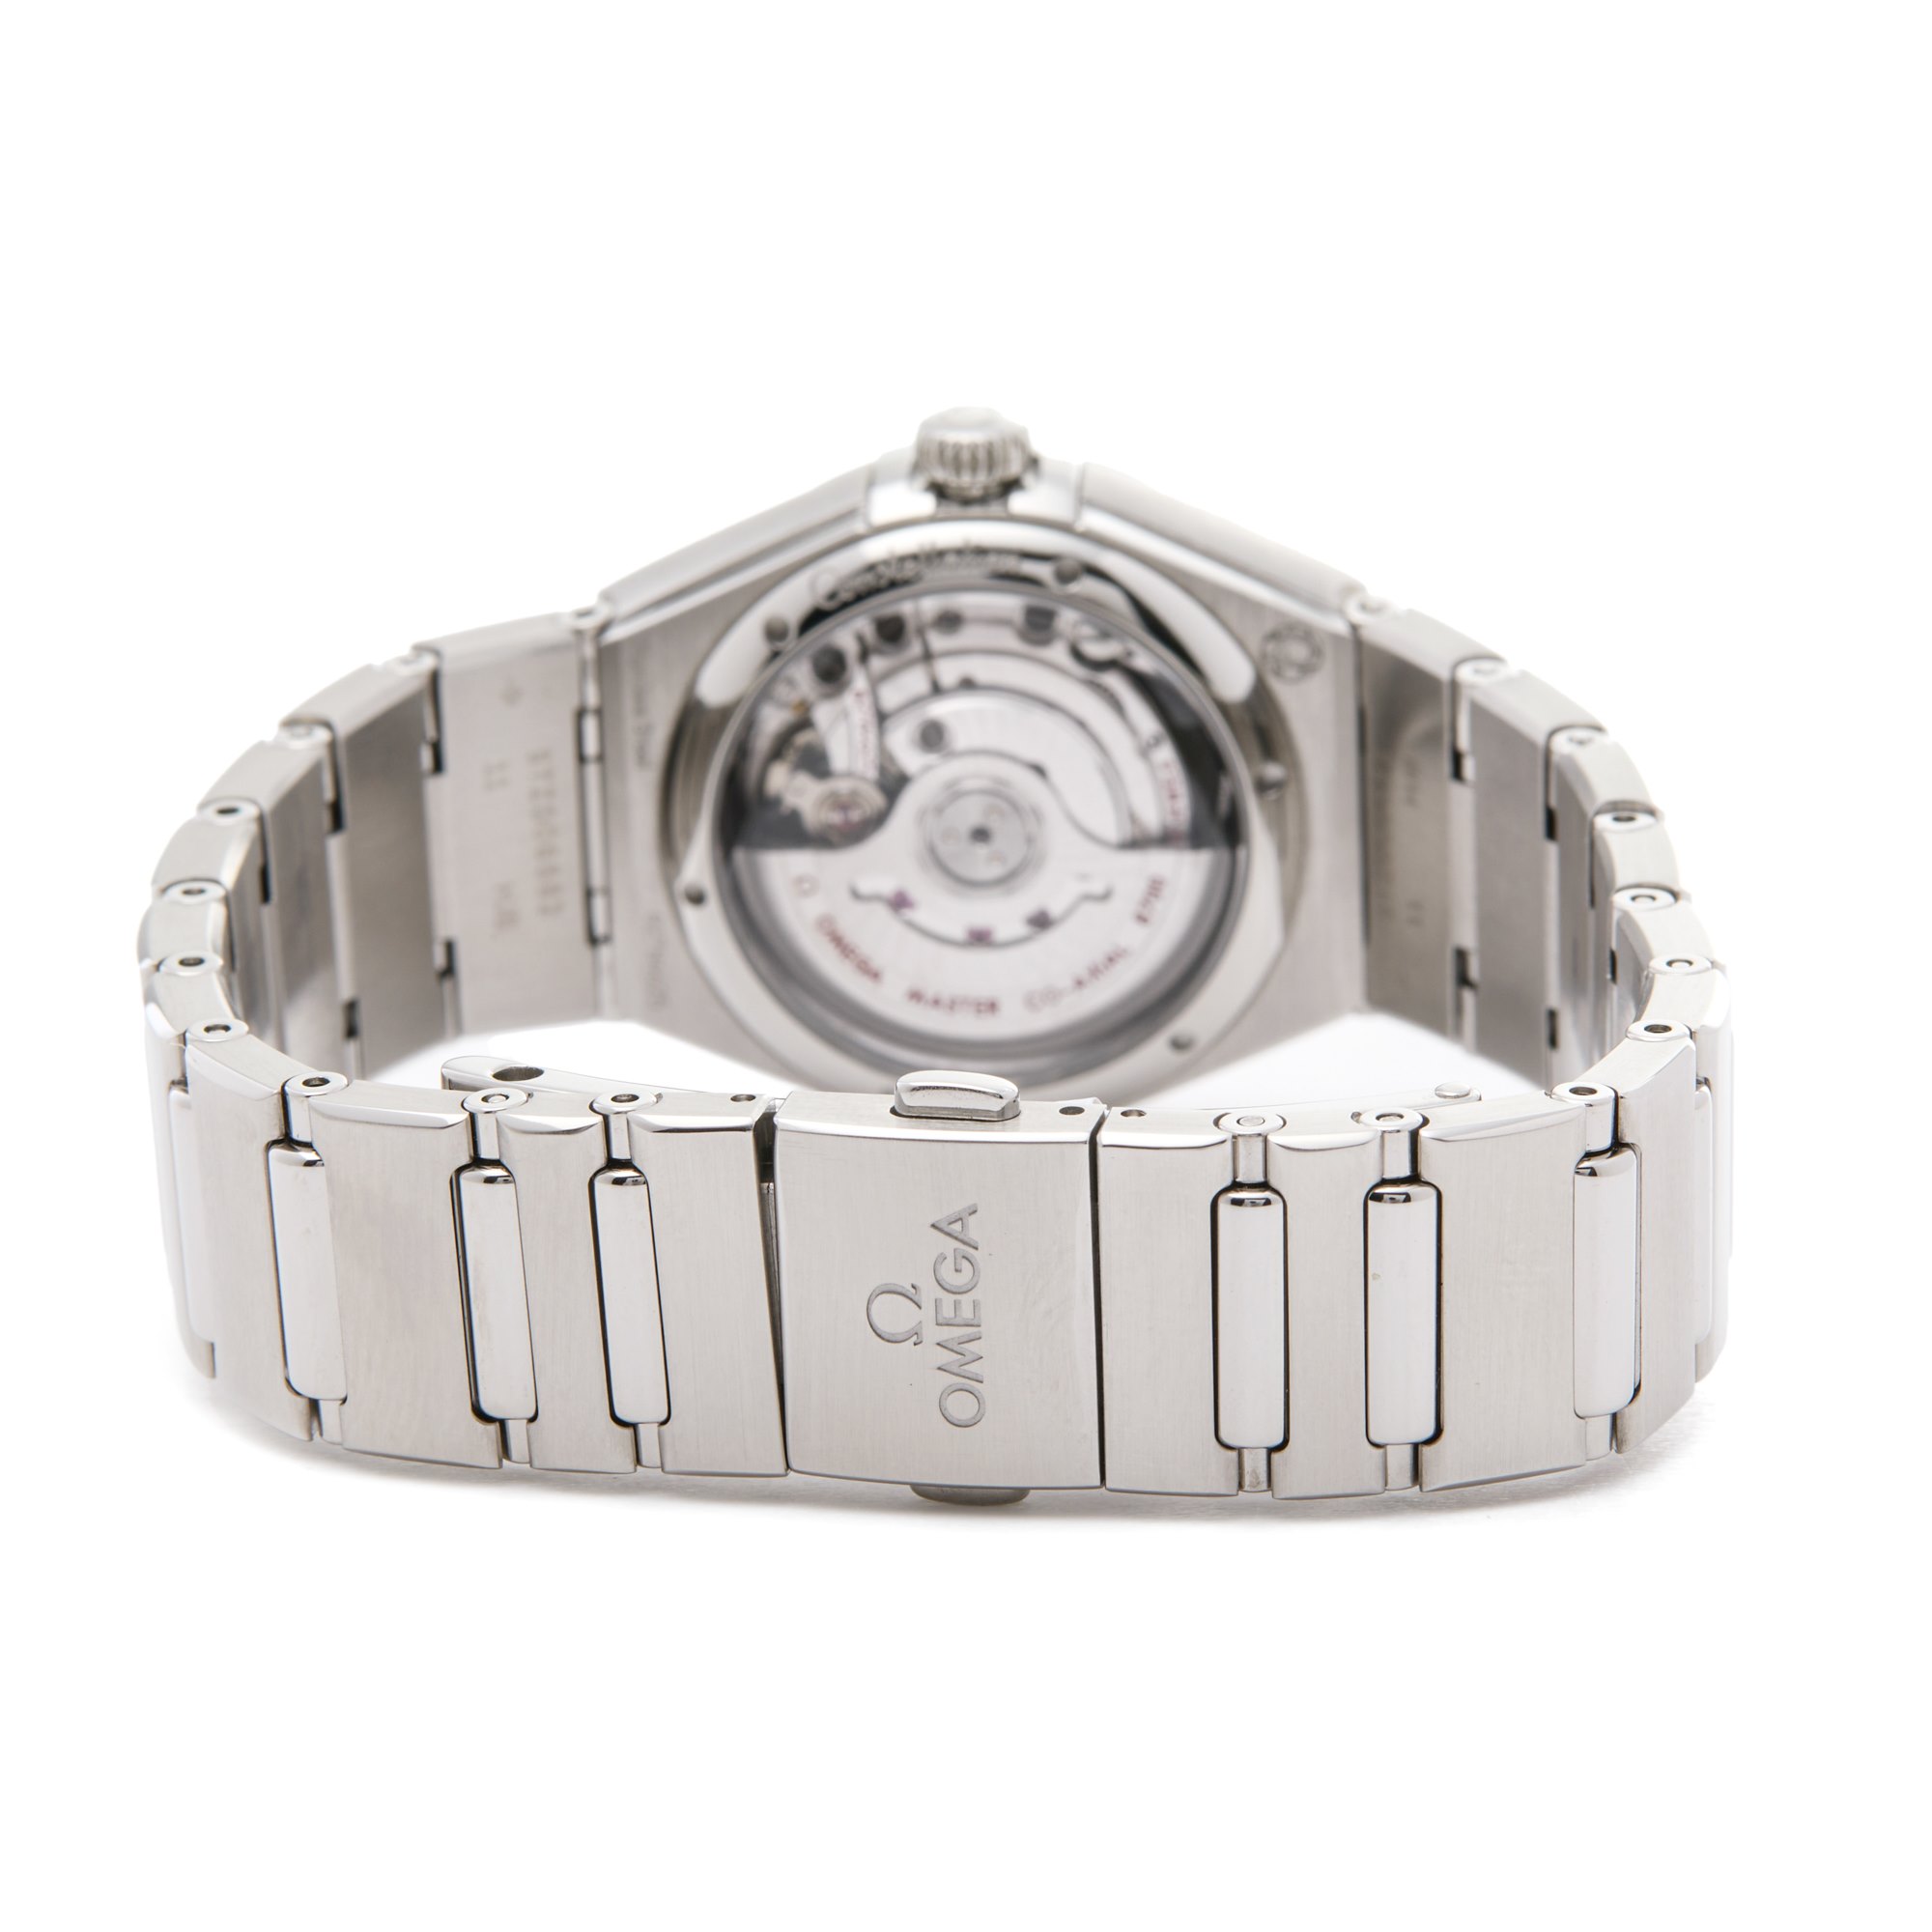 Omega Constellation Stainless Steel 131.15.29.20.53.001